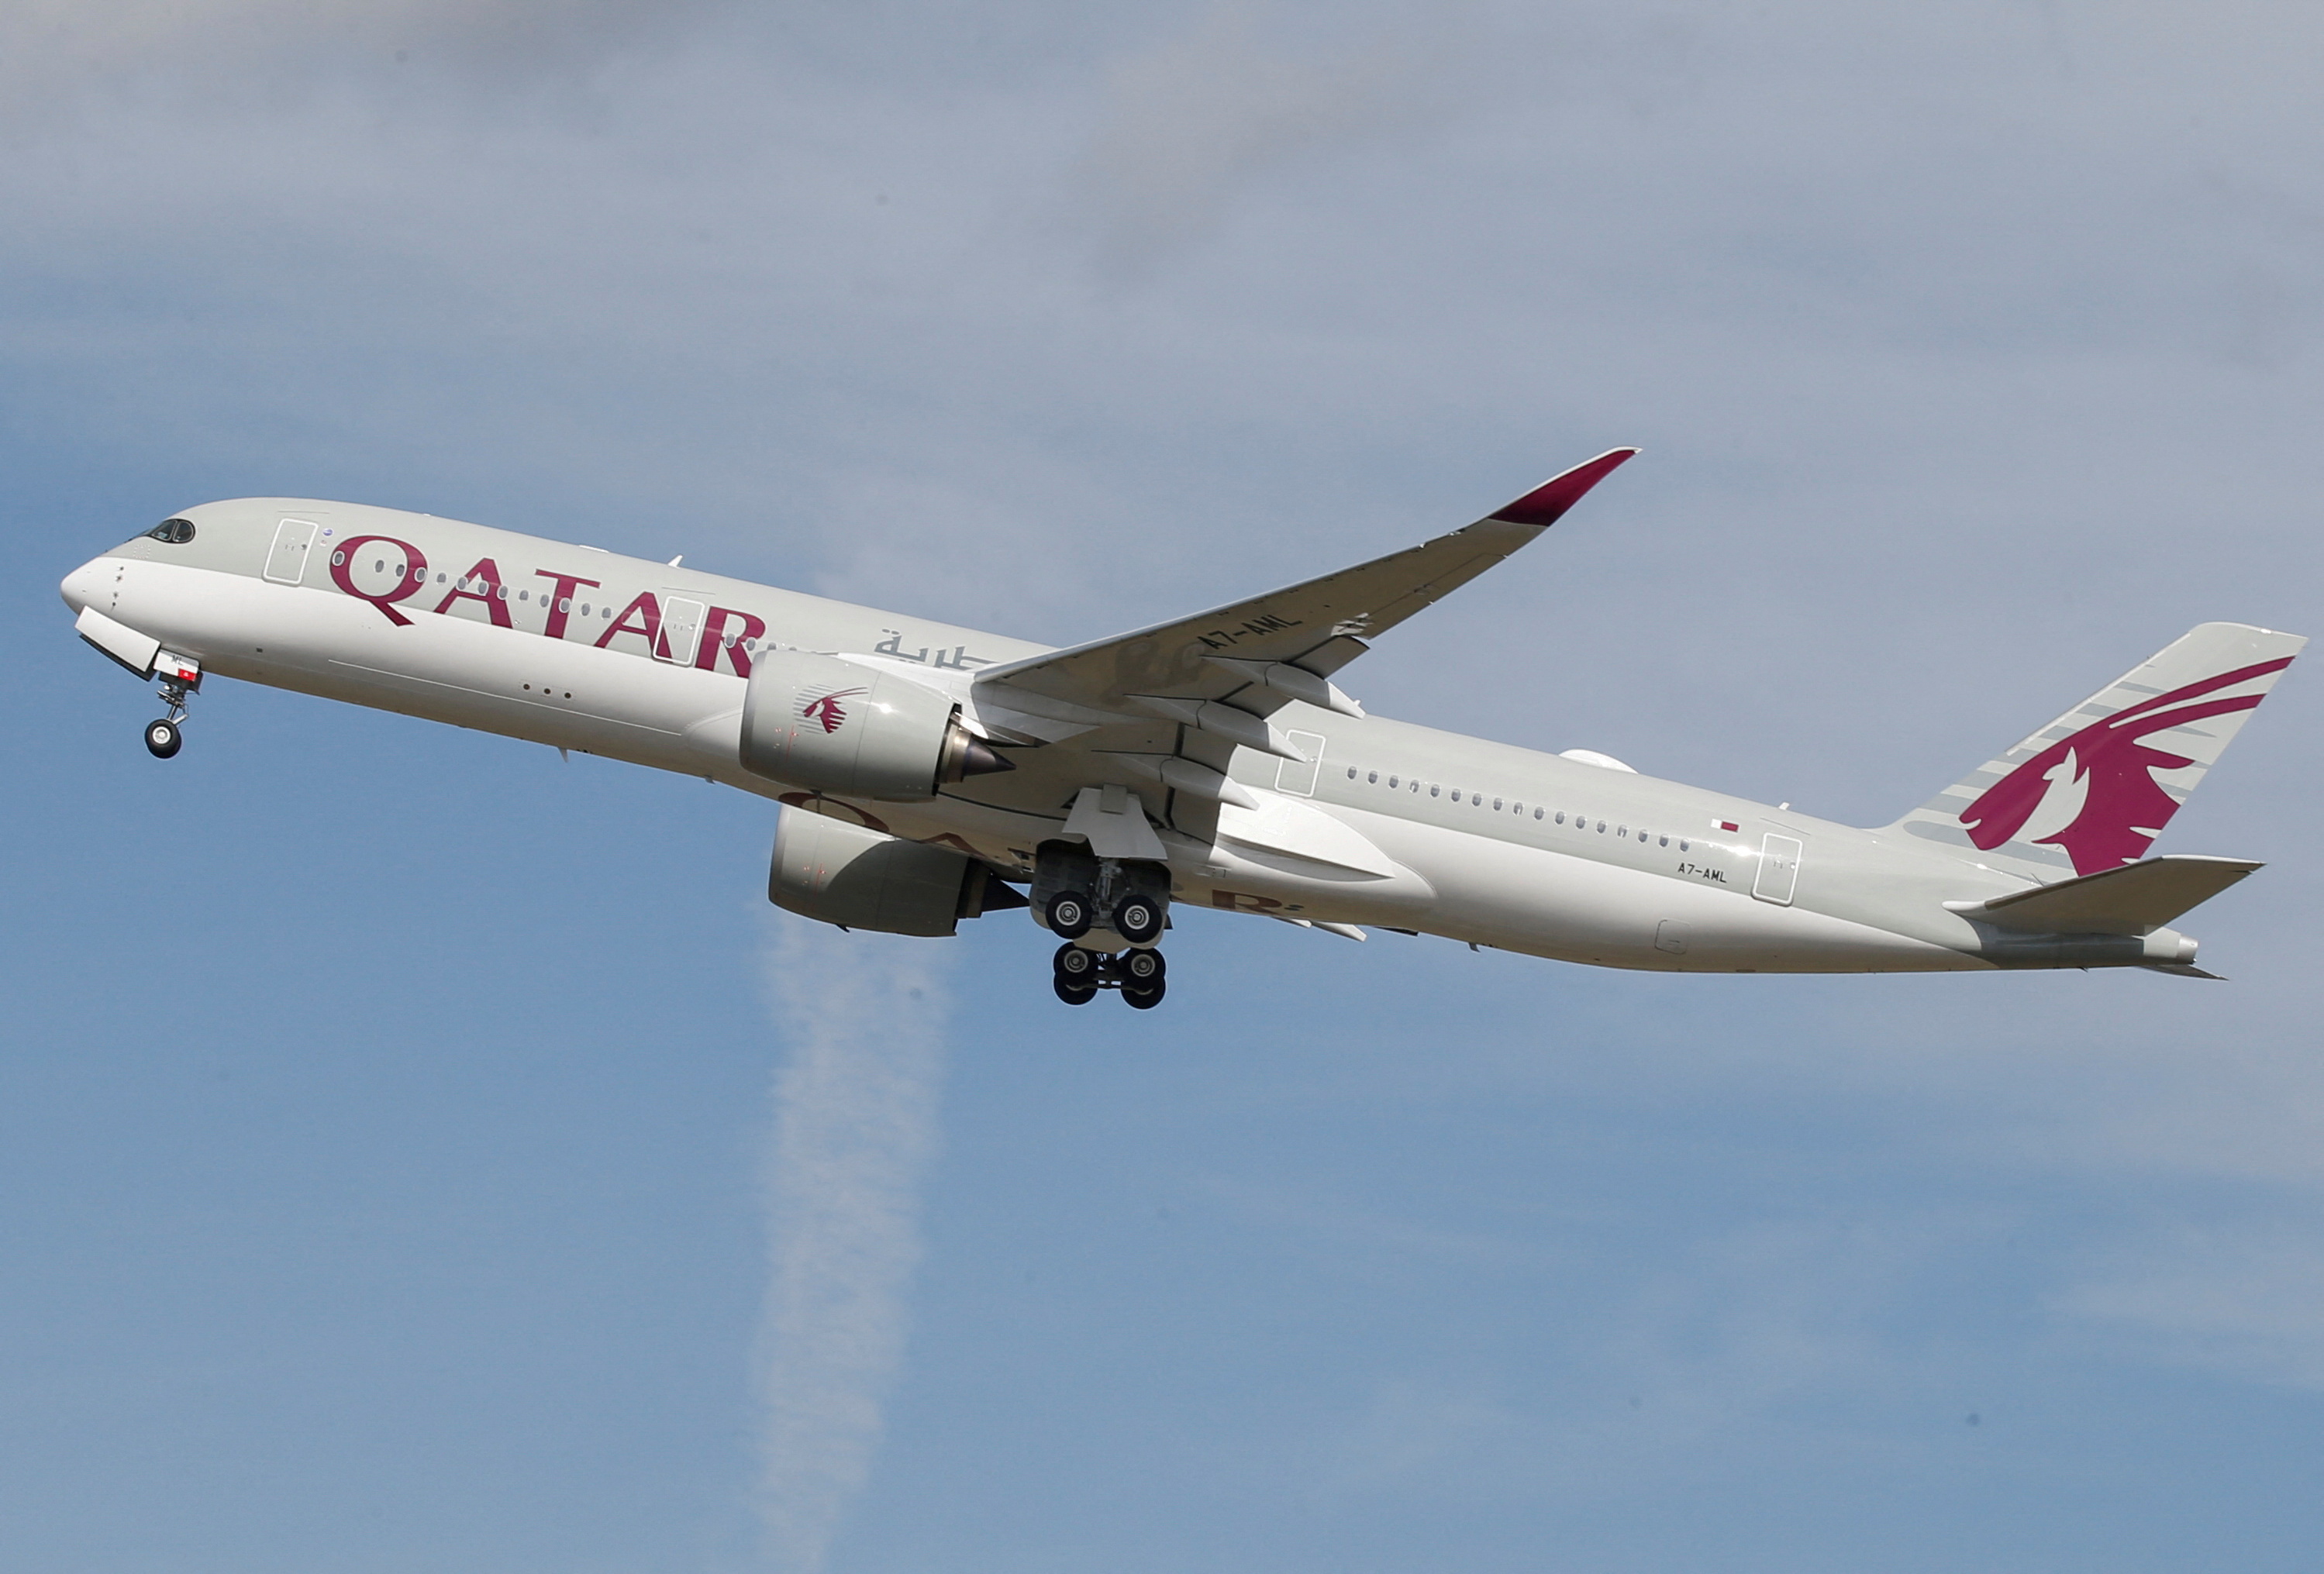 A Qatar Airways aircraft takes off at the aircraft builder's headquarters of Airbus in Colomiers near Toulouse